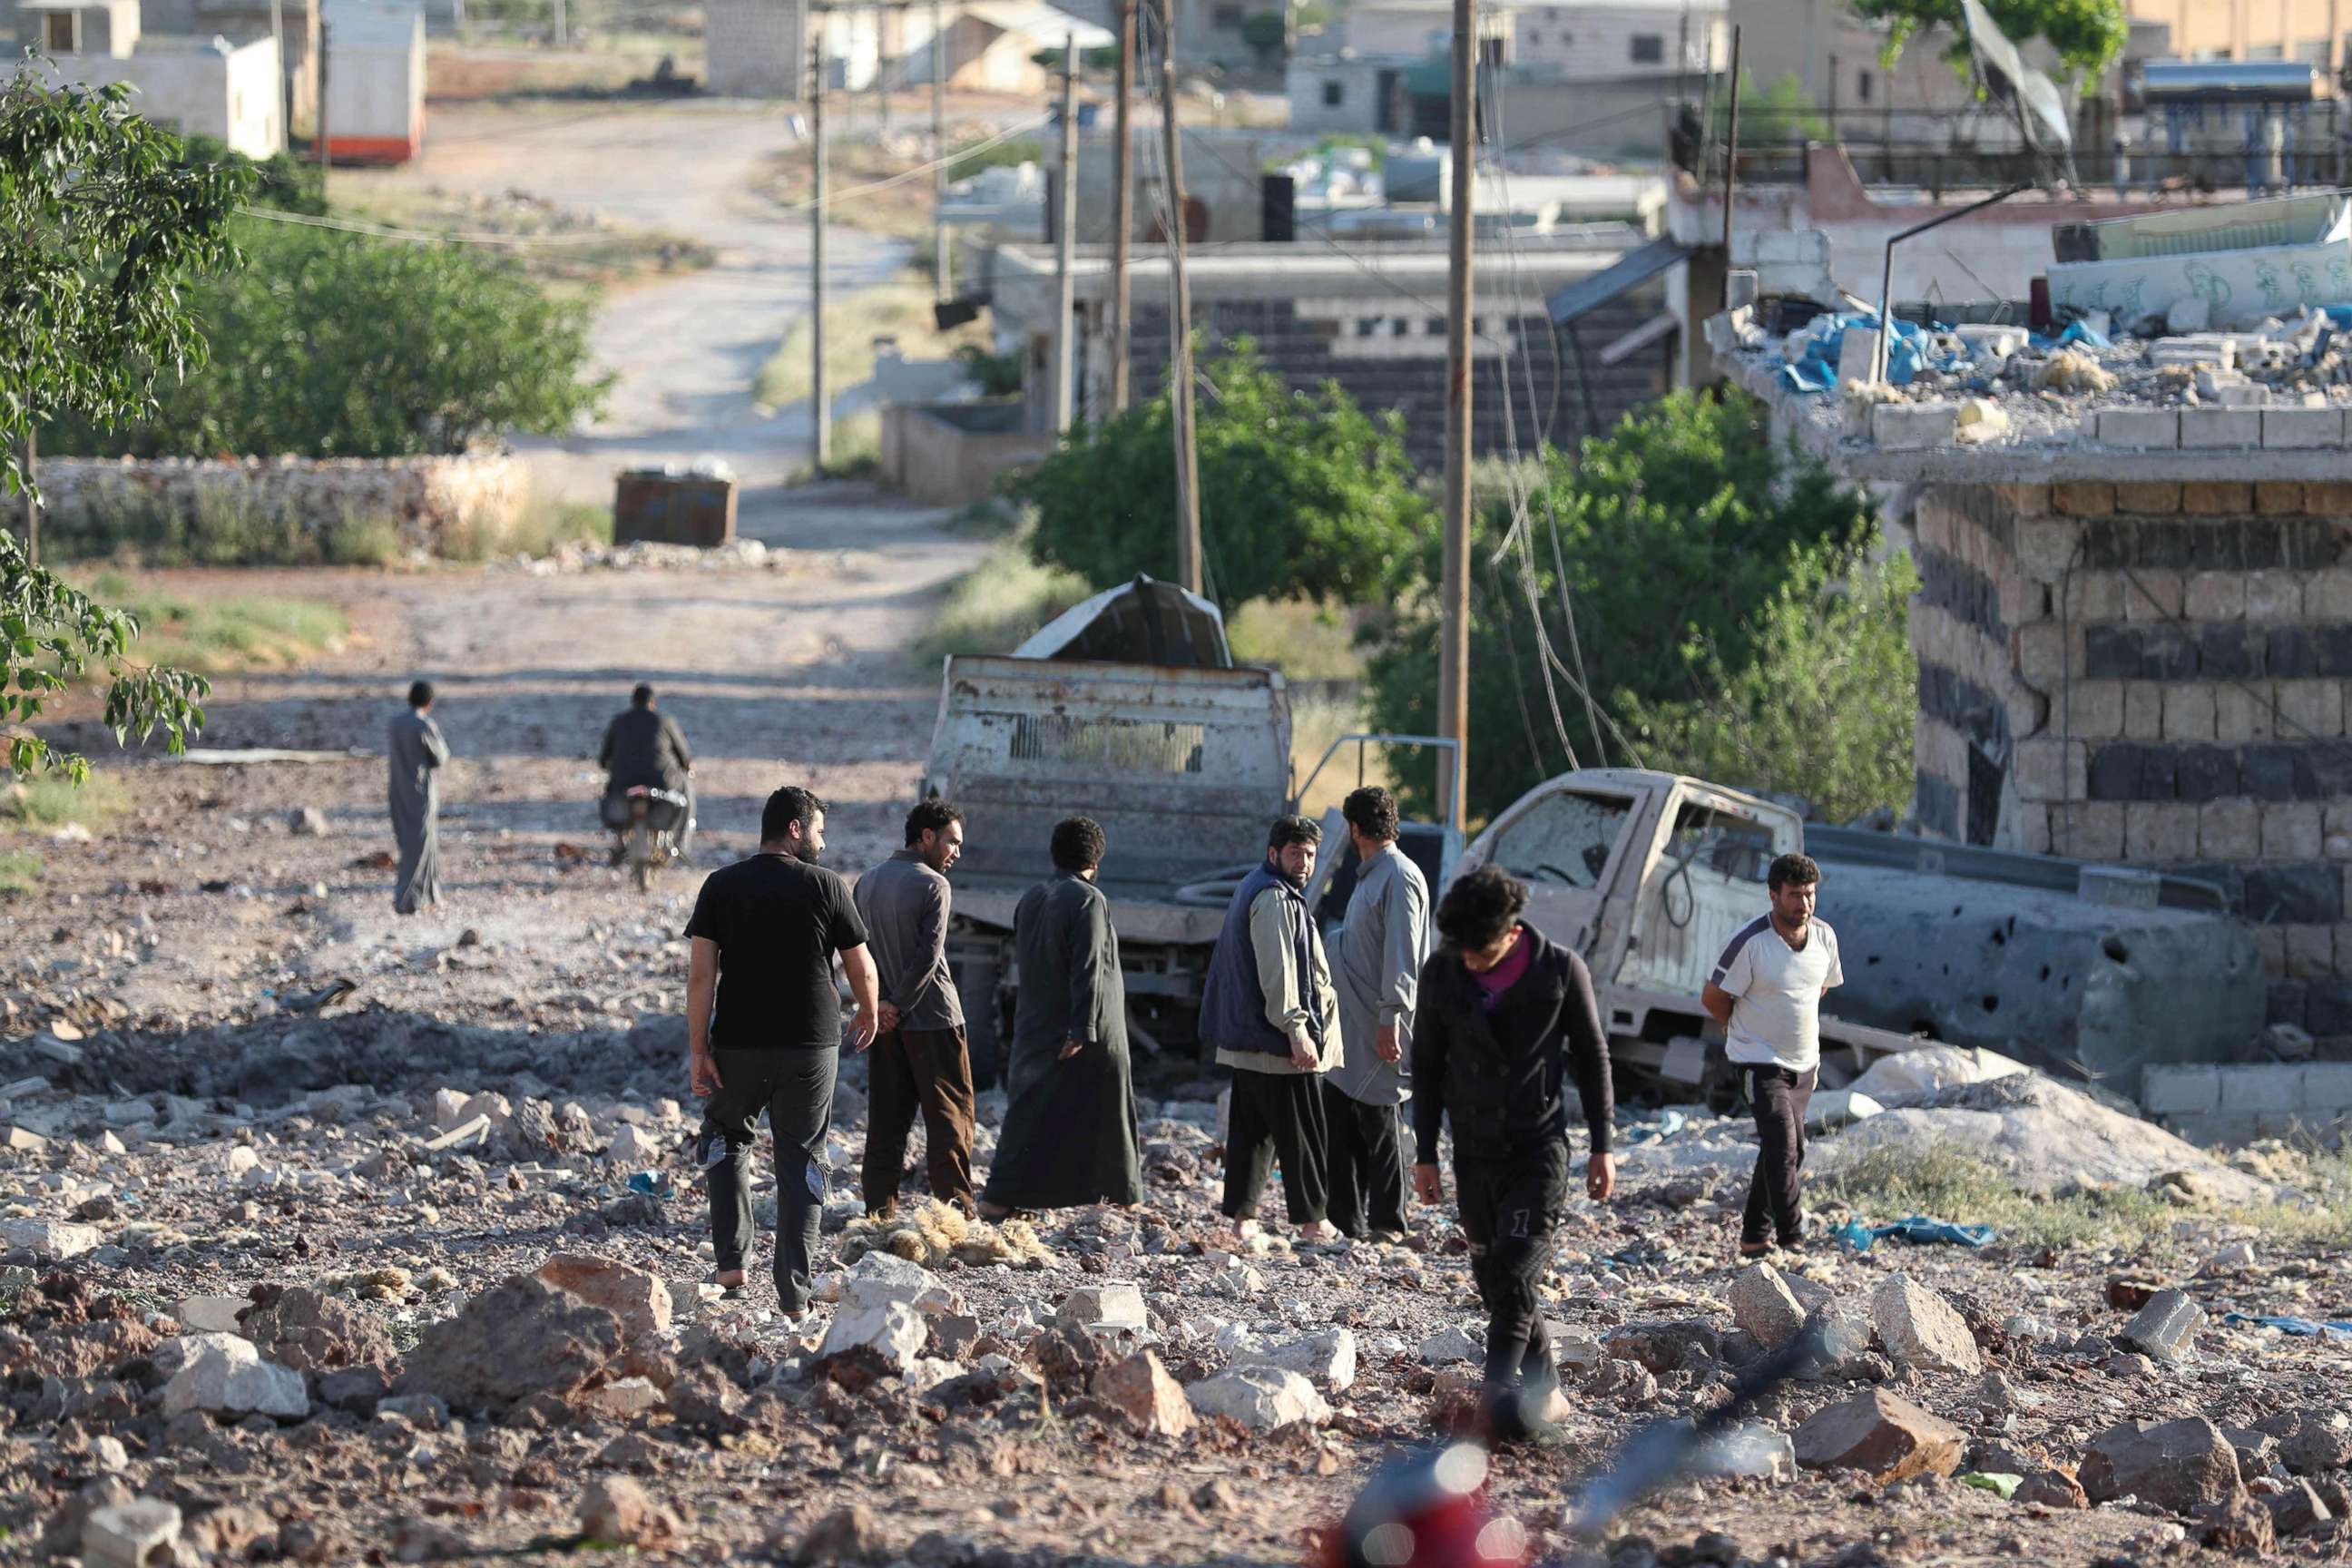 PHOTO: People gather amidst the rubble and damaged vehicles following reported airstrikes by the Syrian regime ally Russia, in the town of Kafranbel in the rebel-held part of the Syrian Idlib province, May 20, 2019.